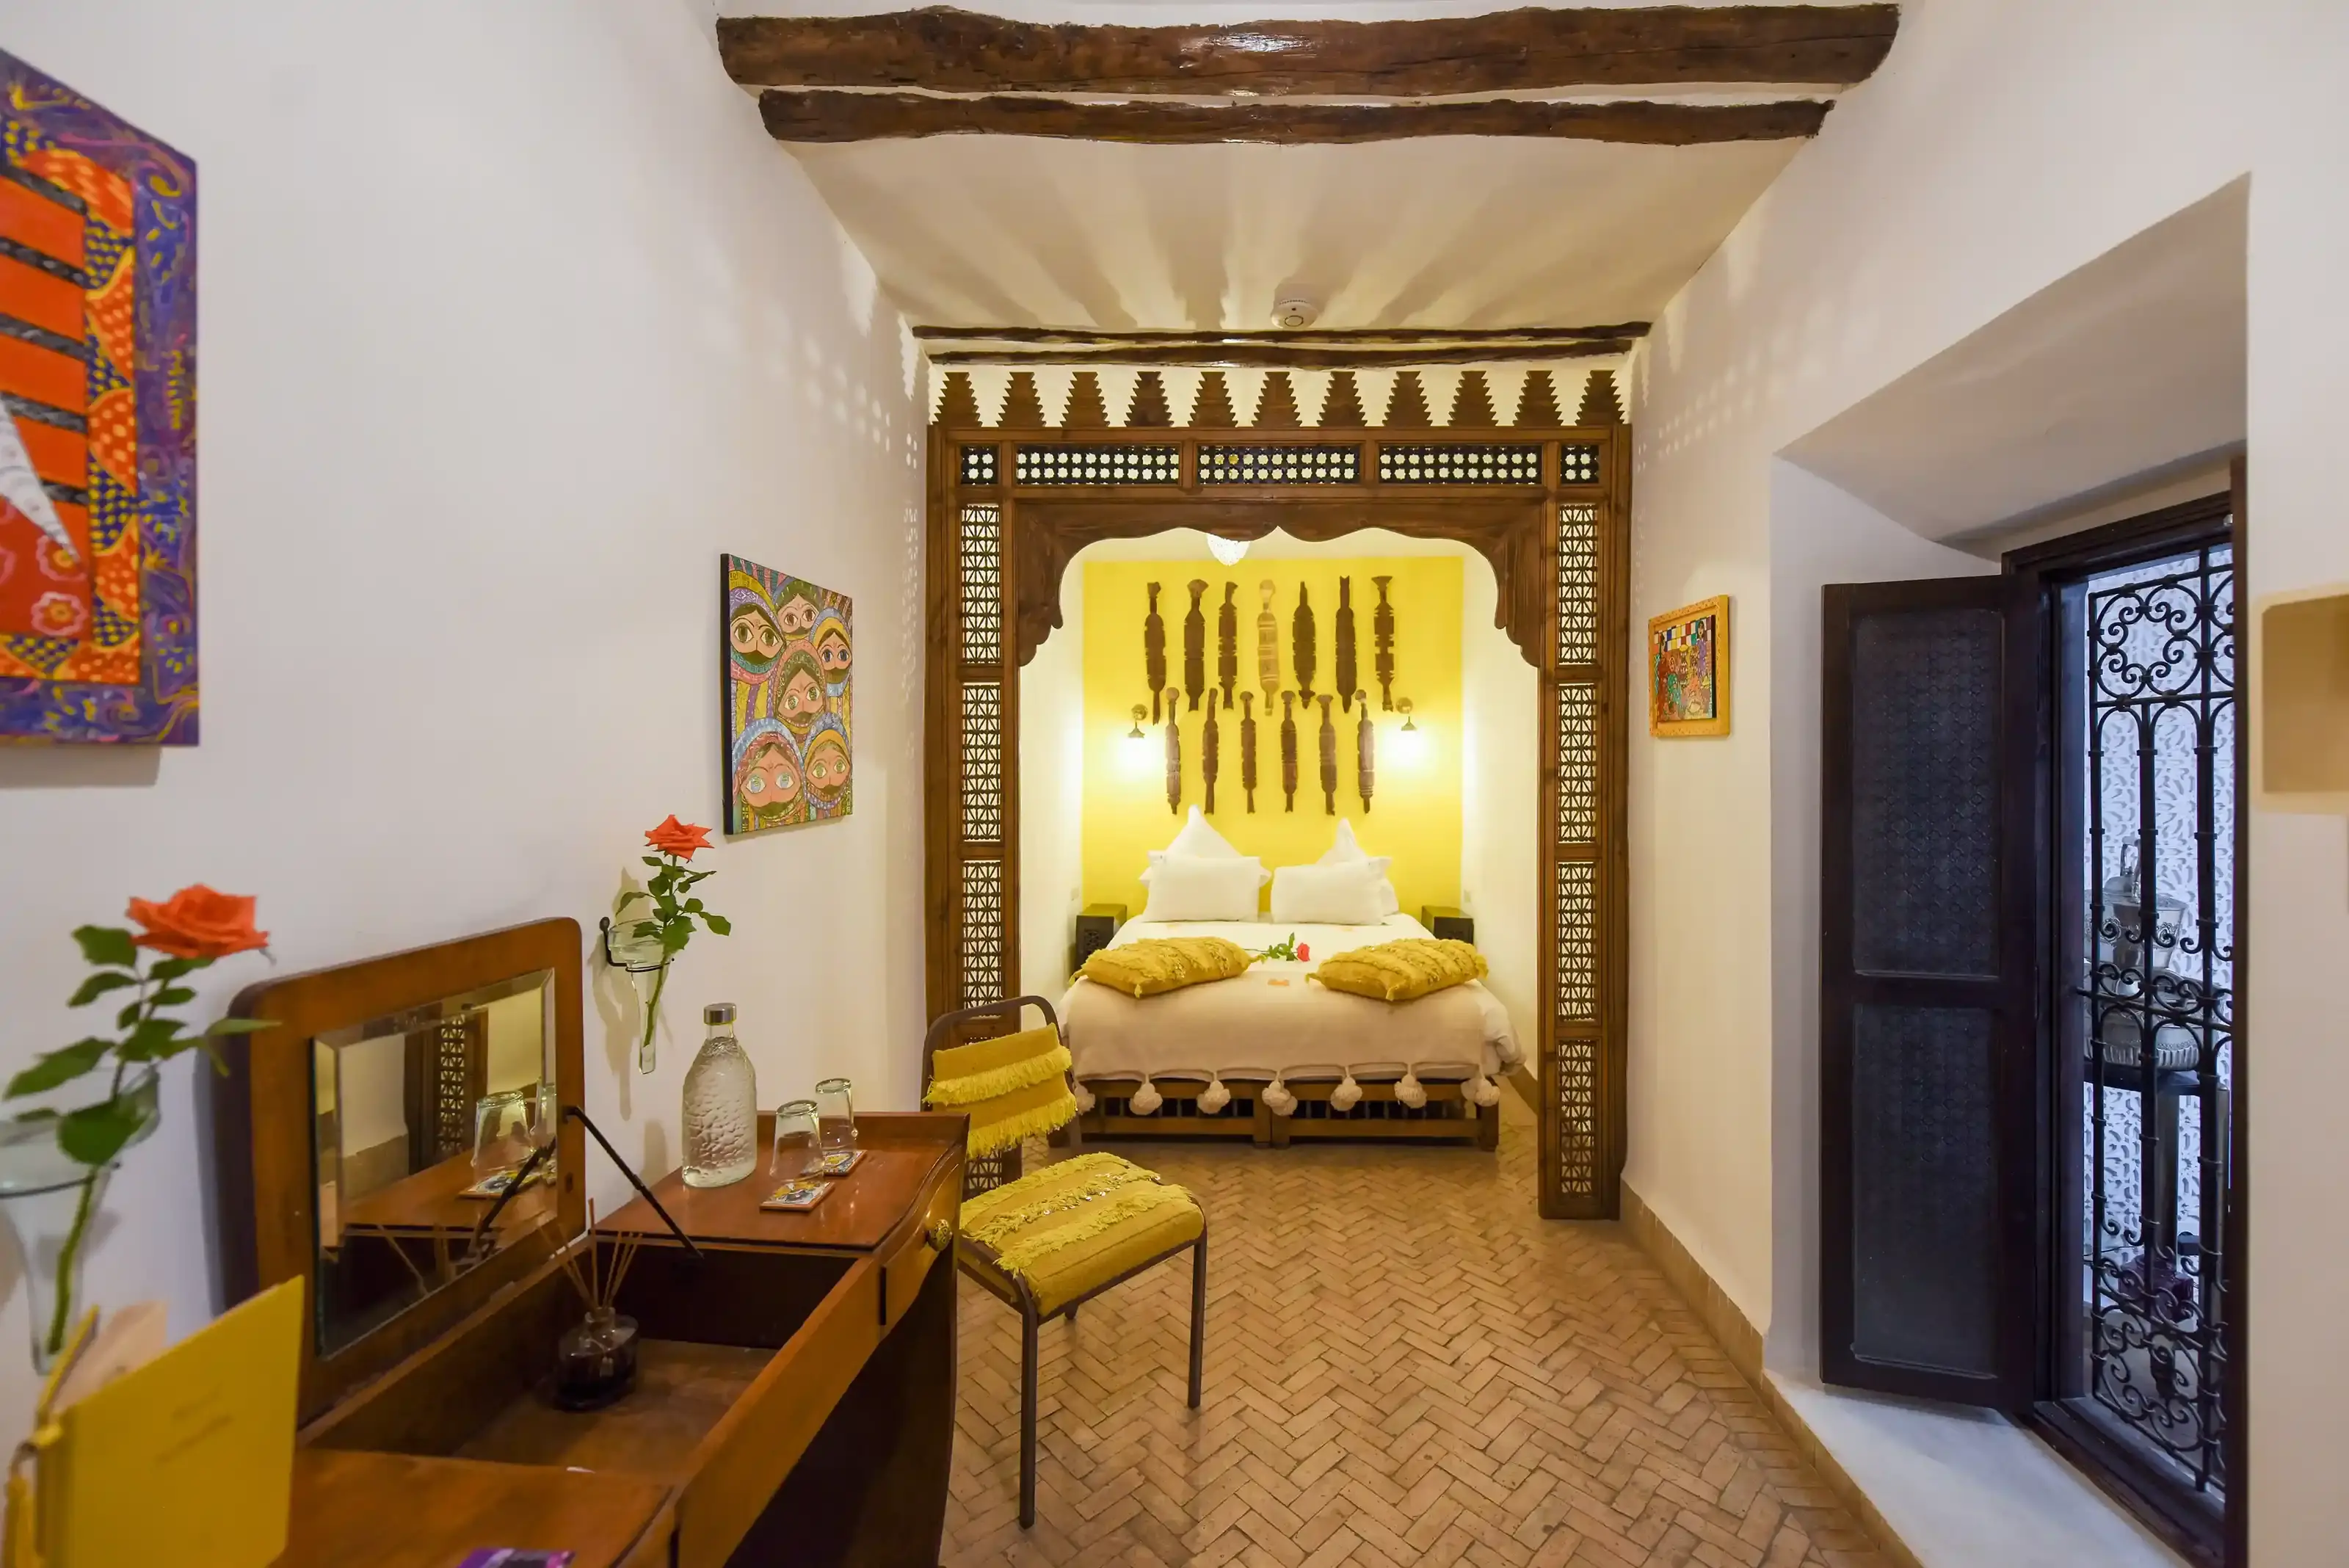 The standard rooms of our guesthouse are equipped with twin or double beds